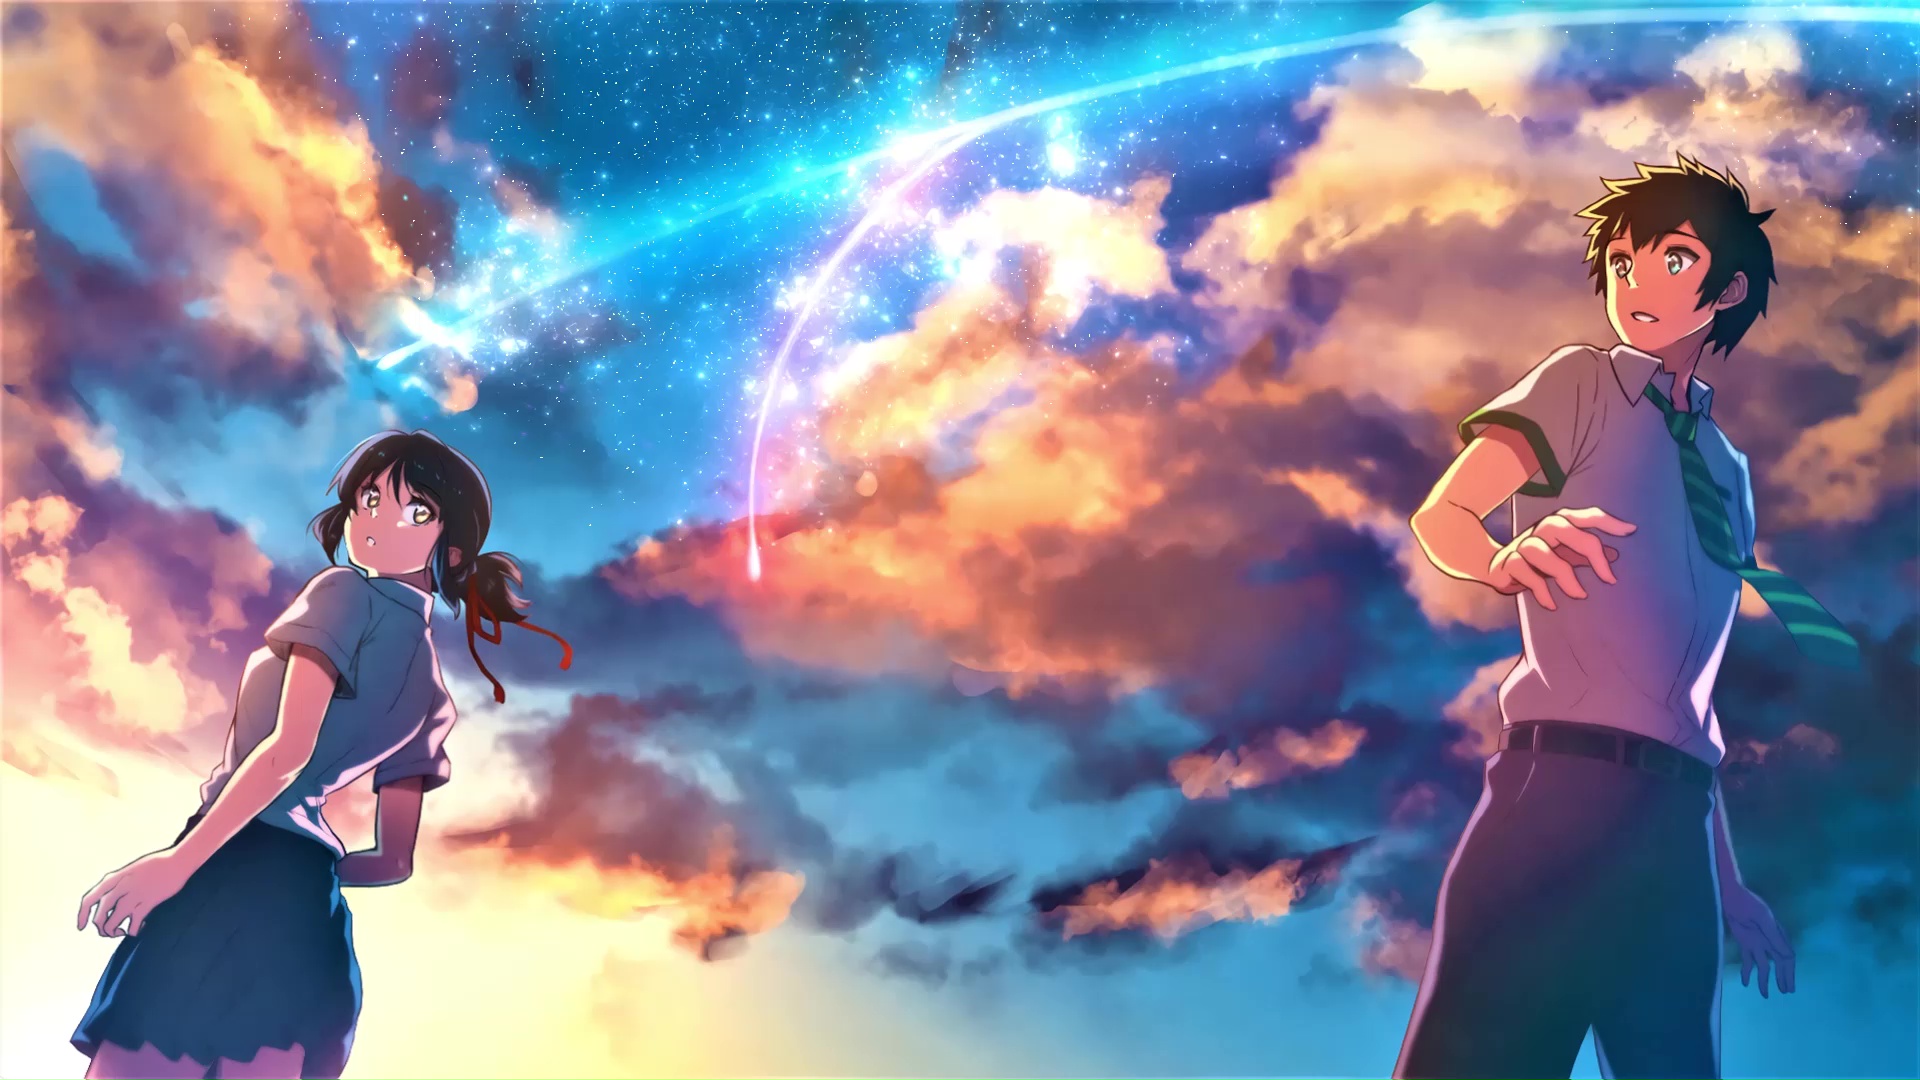 Your Name Live Wallpapers Animated Wallpapers Moewalls Sexiz Pix The